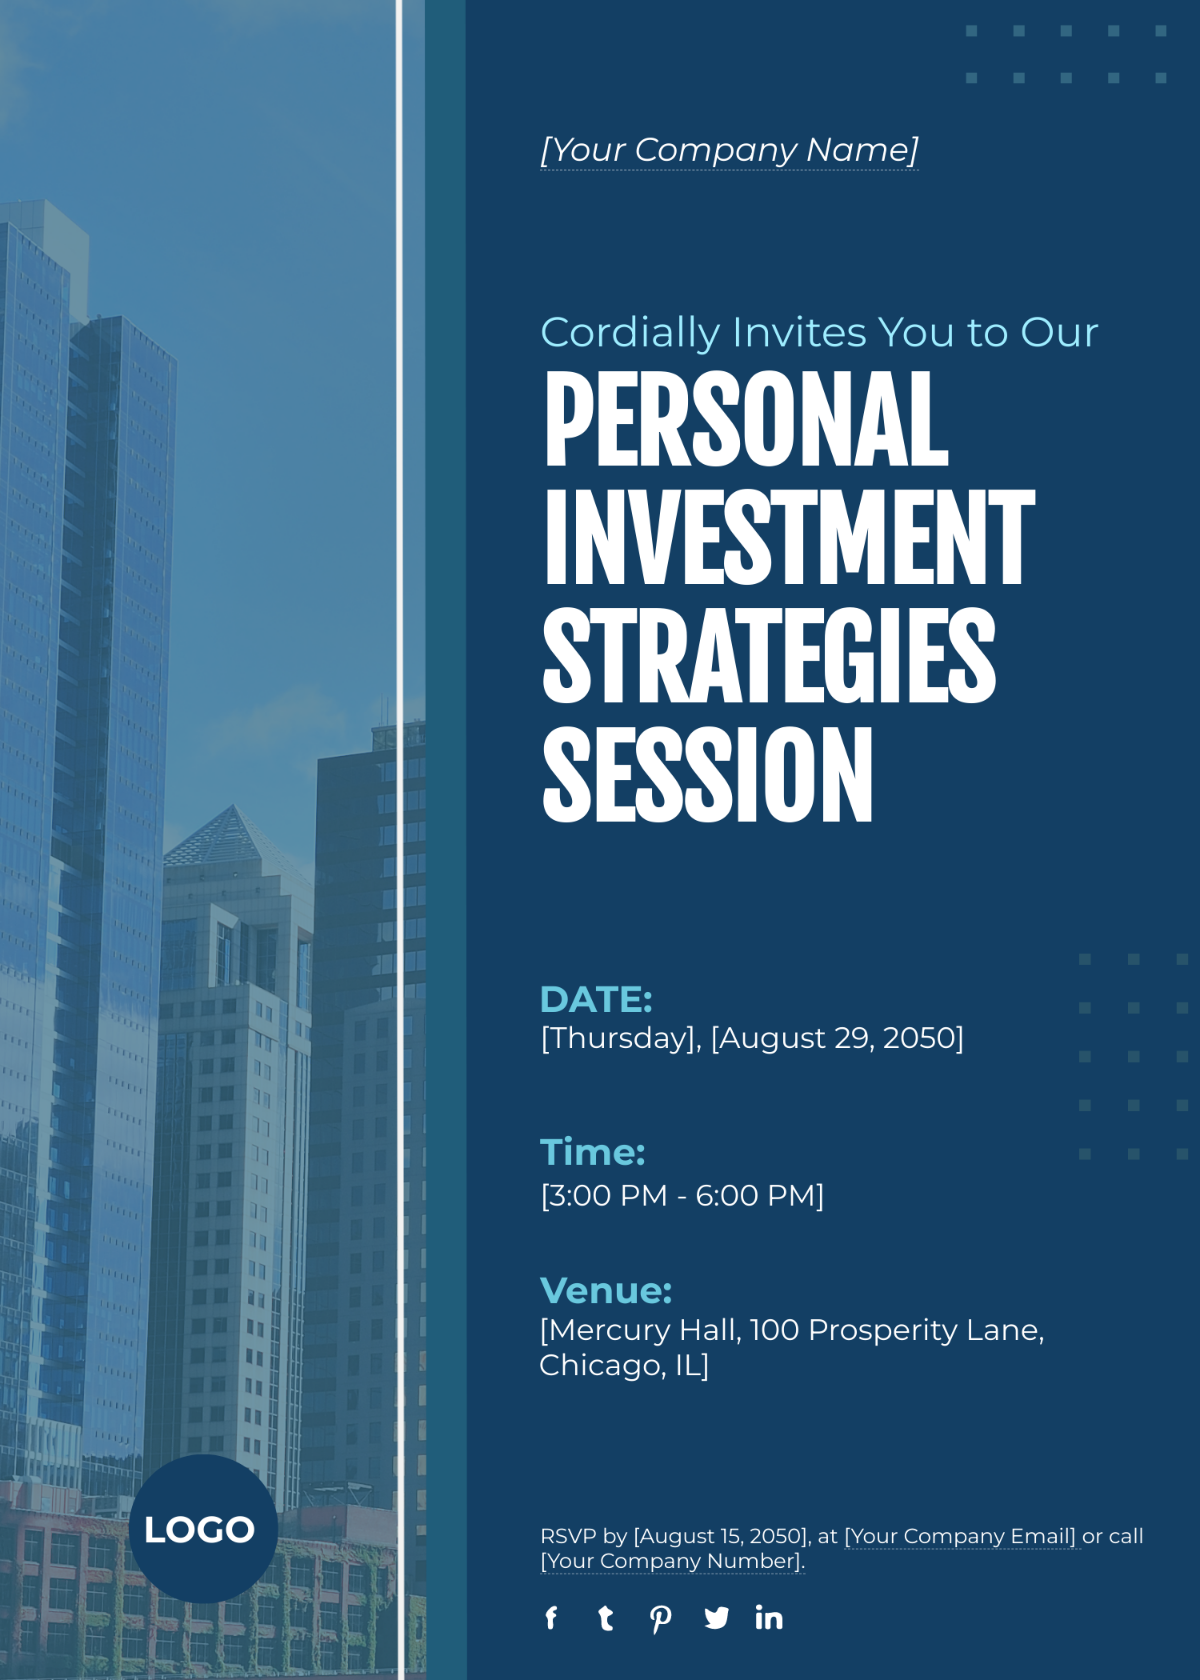 Personal Investment Strategies Session Invitation Card Template